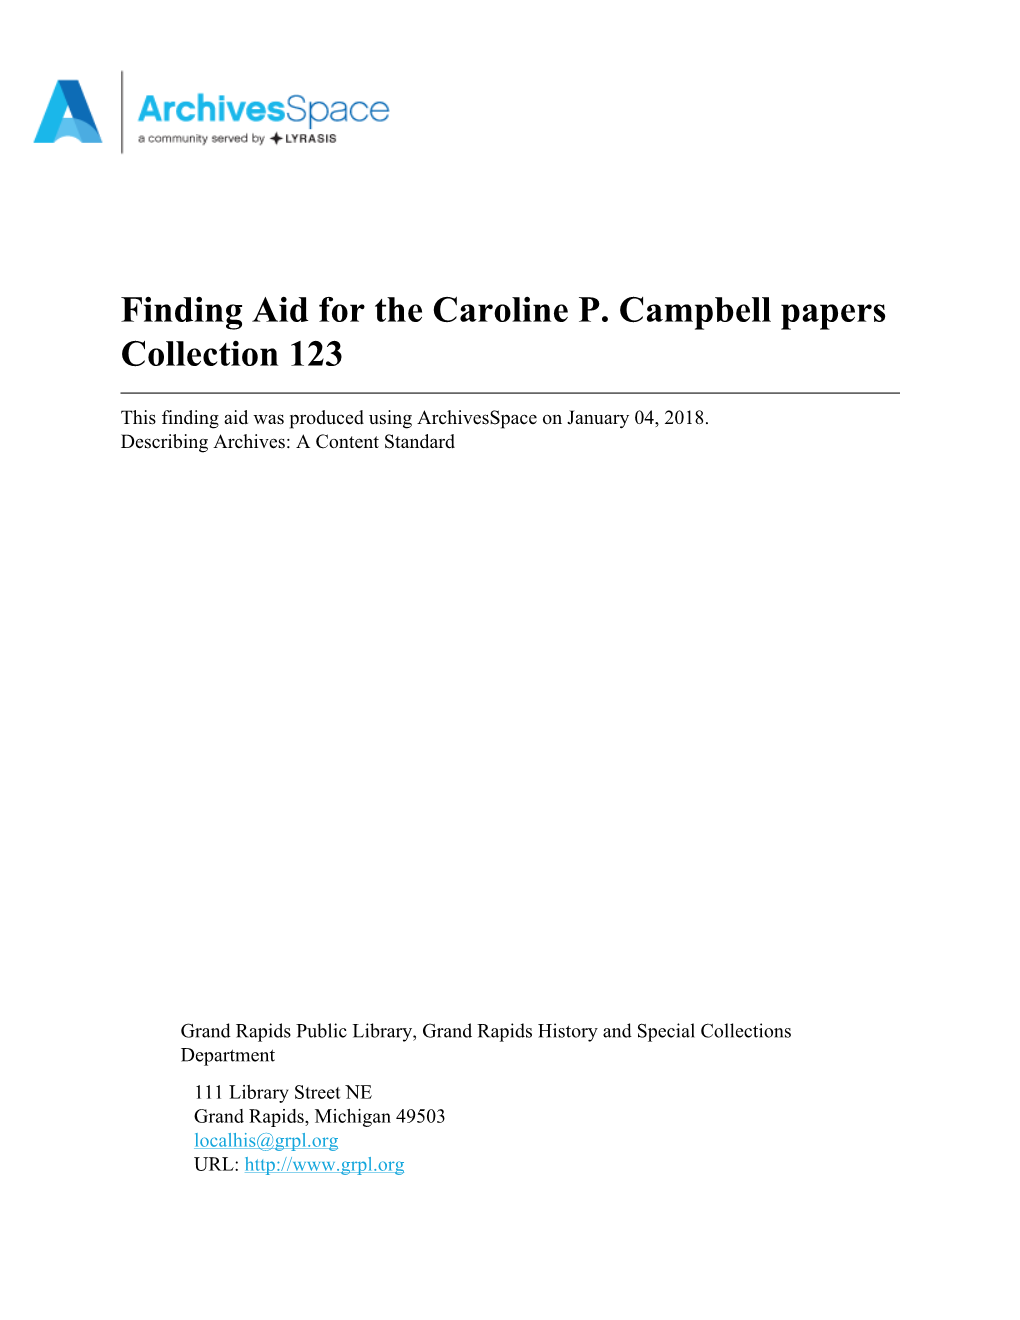 Finding Aid for the Caroline P. Campbell Papers Collection 123